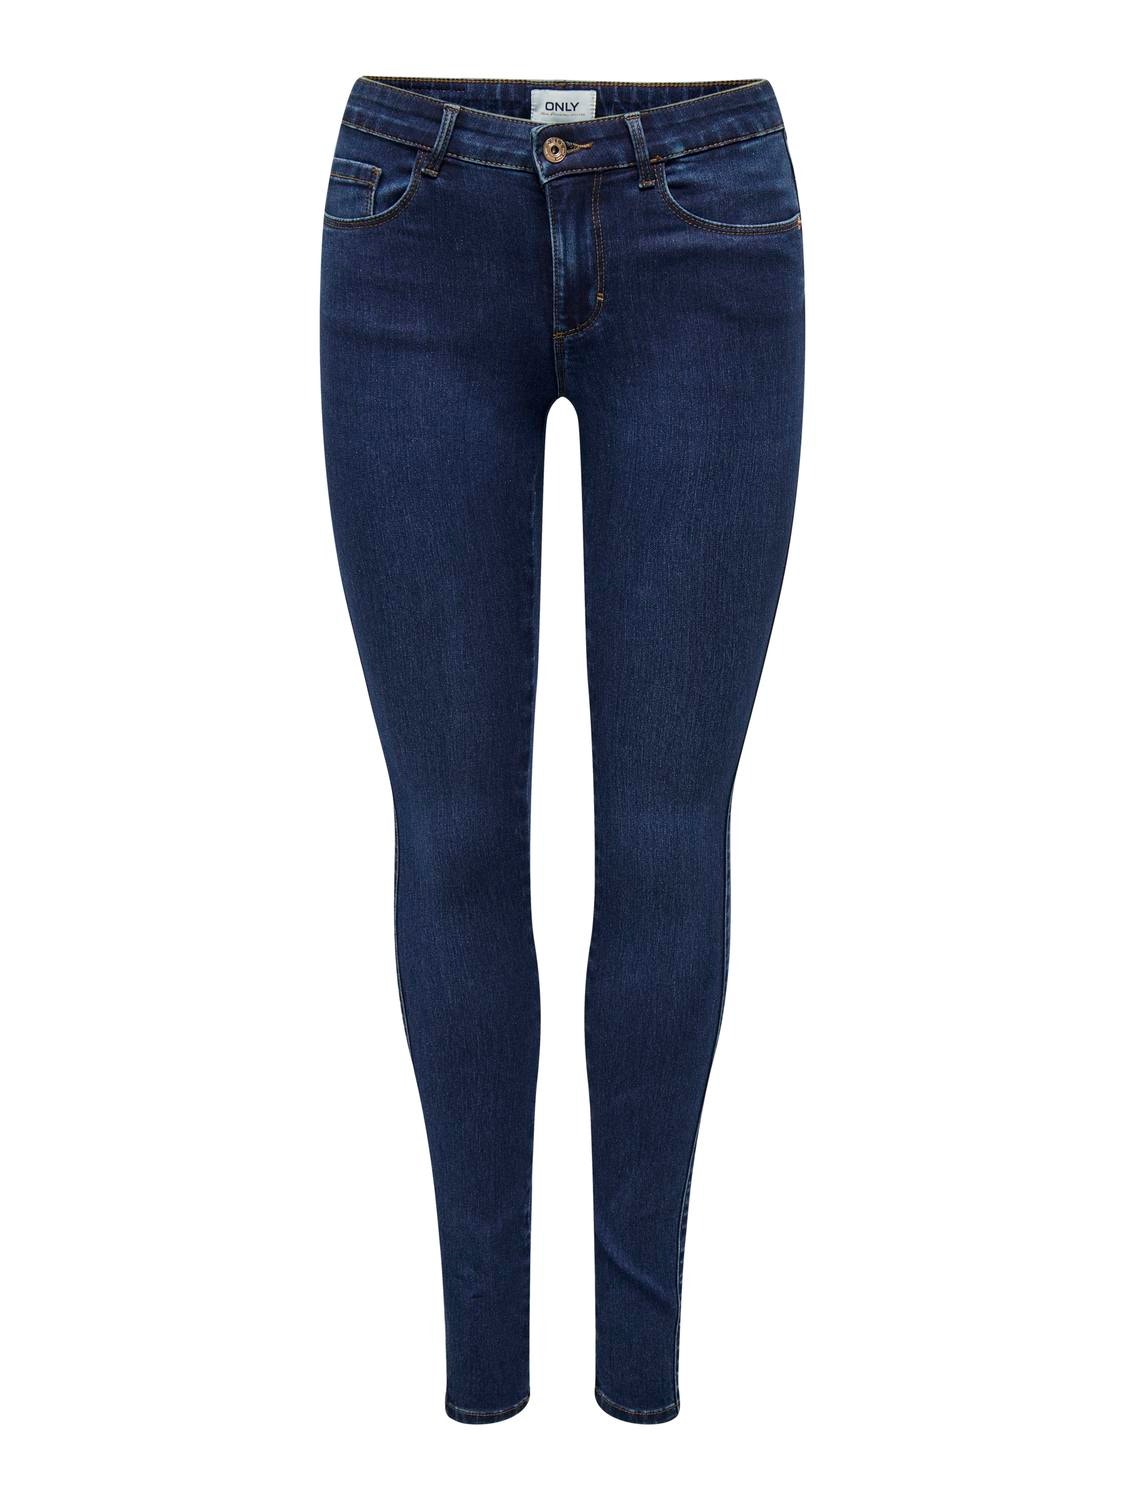 ONLY Jeans Skinny Fit Taille classique -Dark Blue Denim - 15193698